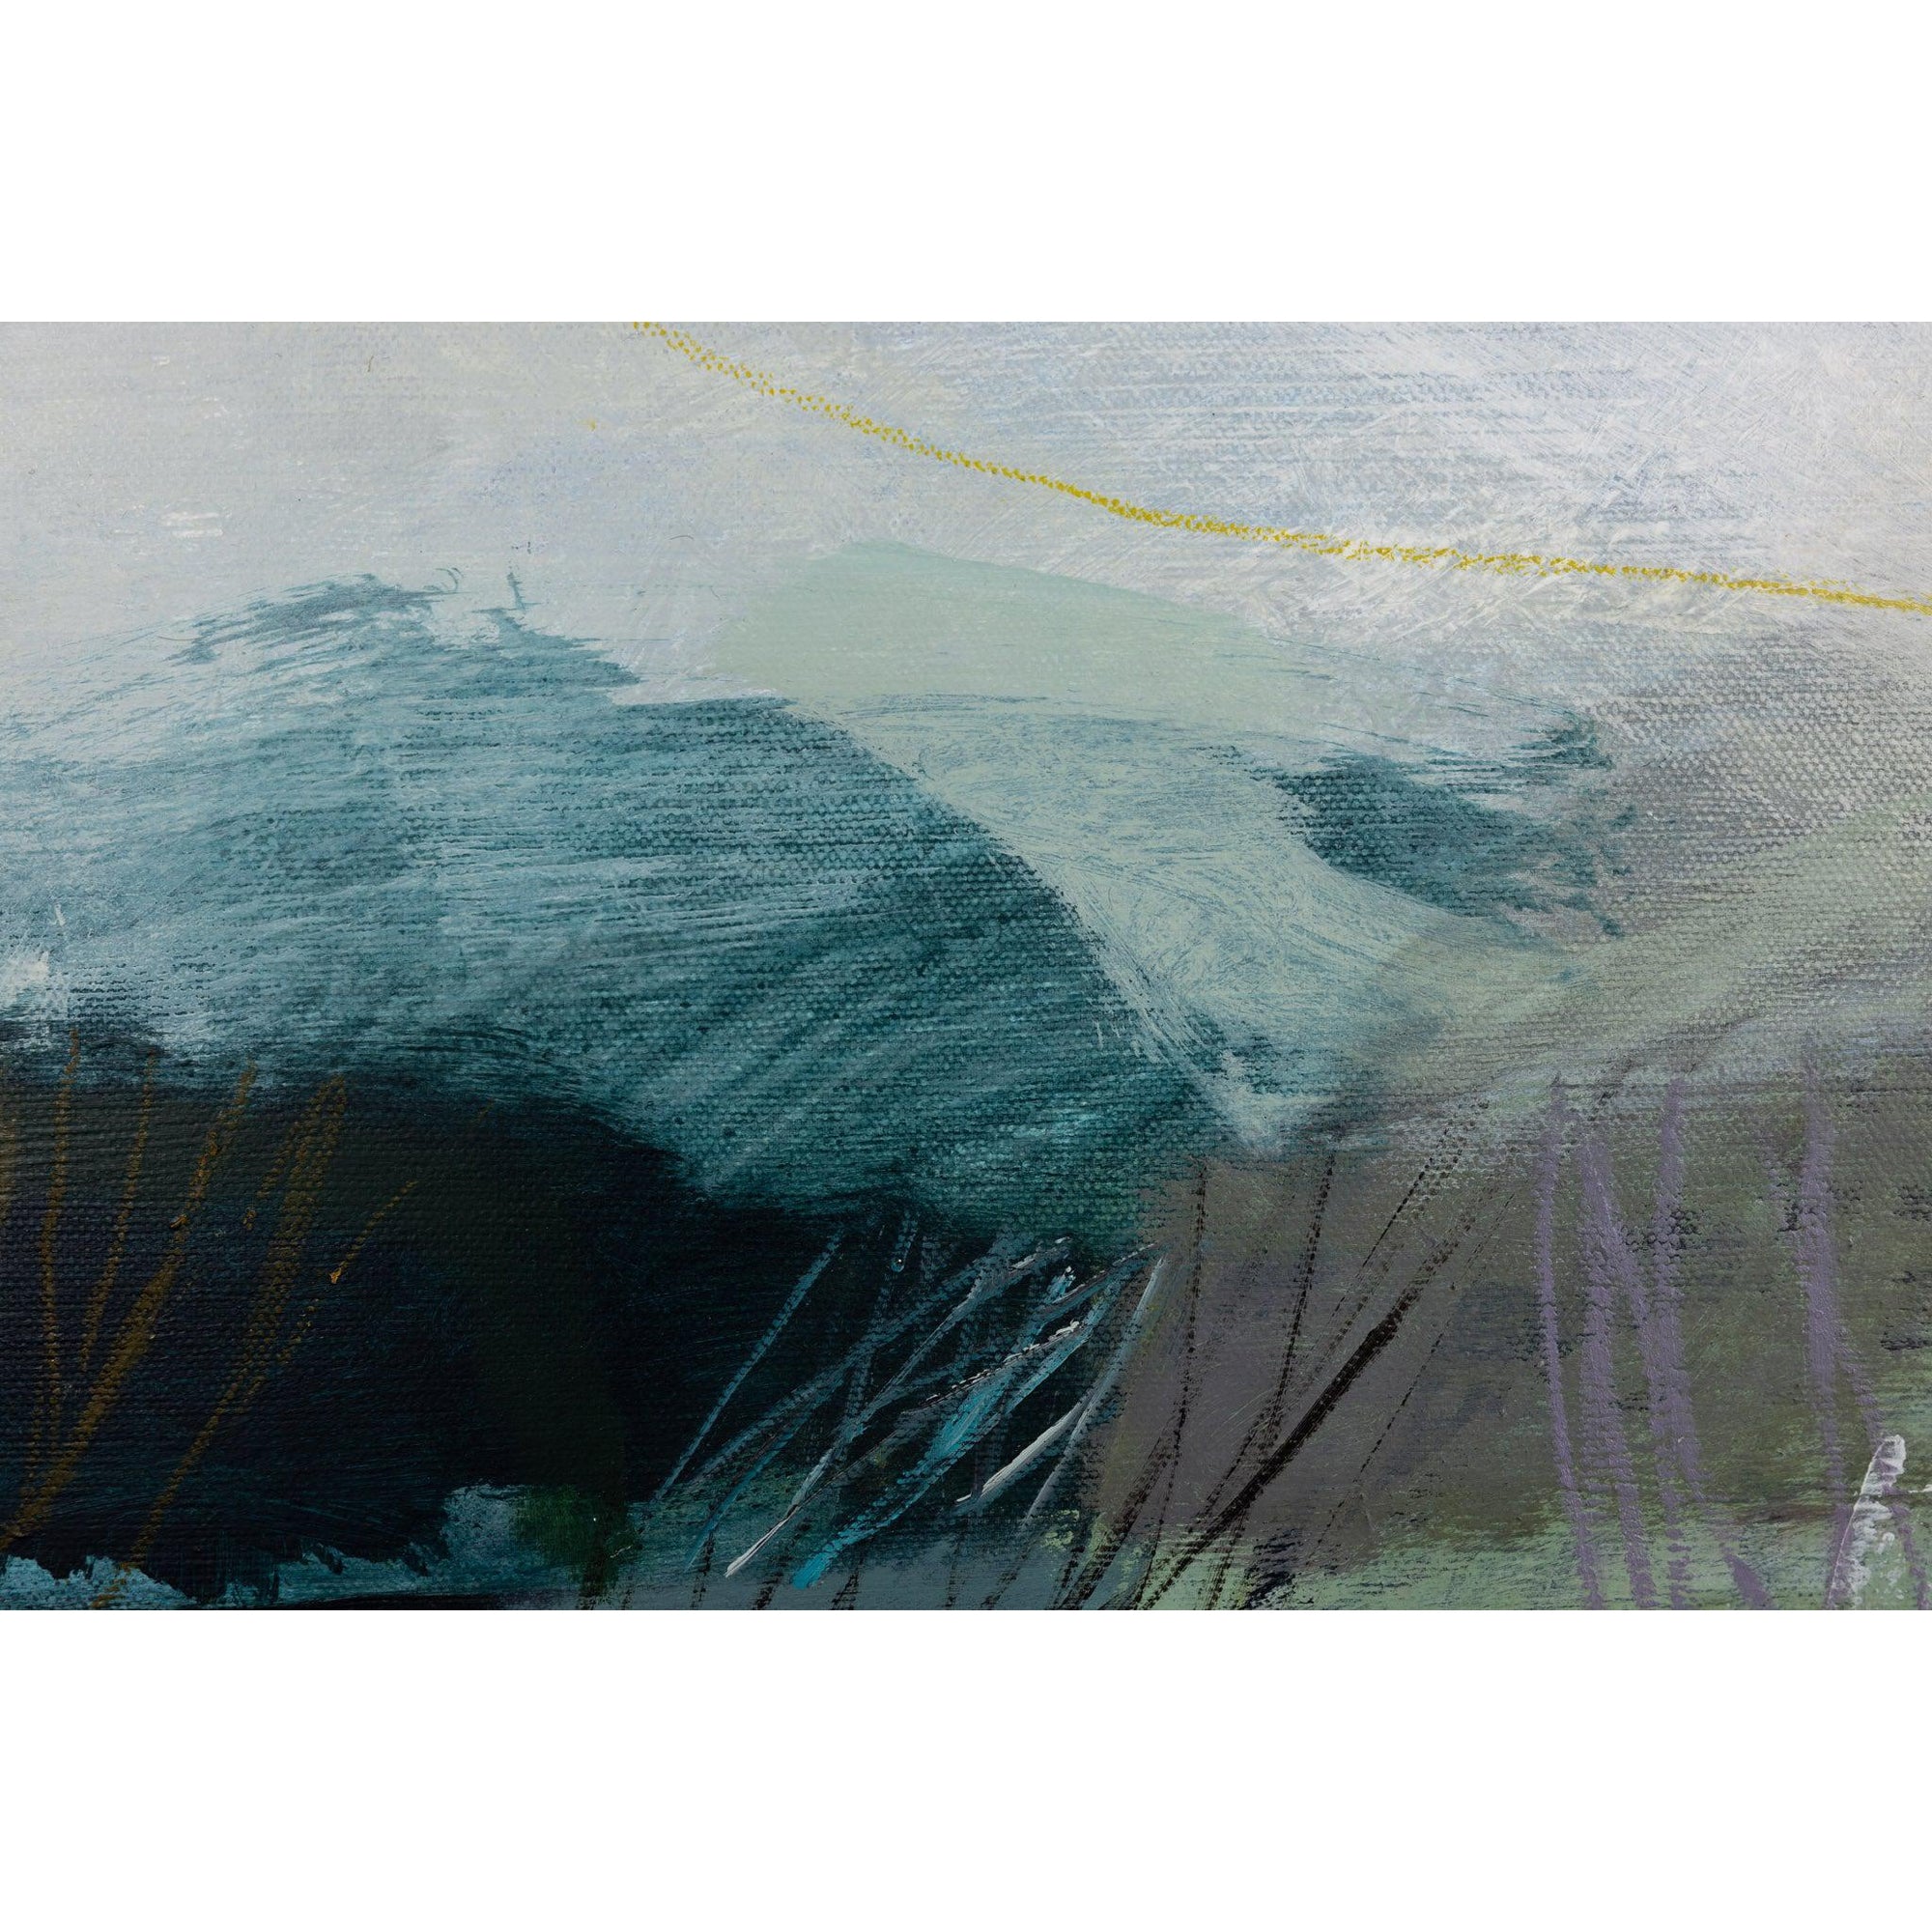 Hidden Landscape 2, mixed media by Karen Birchwood, available from Padstow Gallery, Cornwall